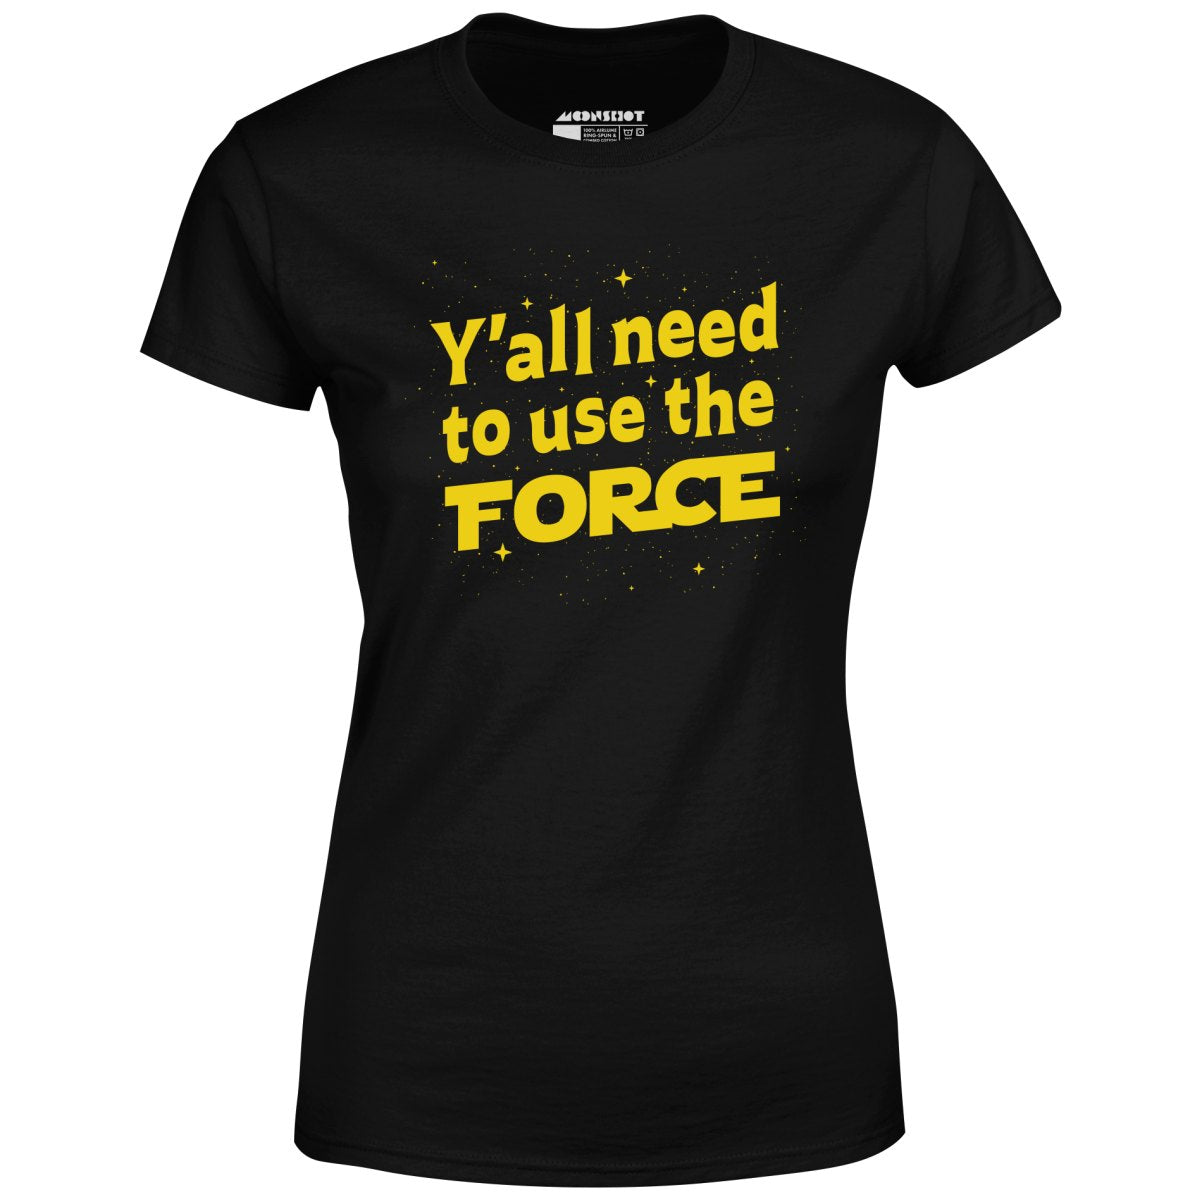 Yall Need to Use The Force - Women's T-Shirt